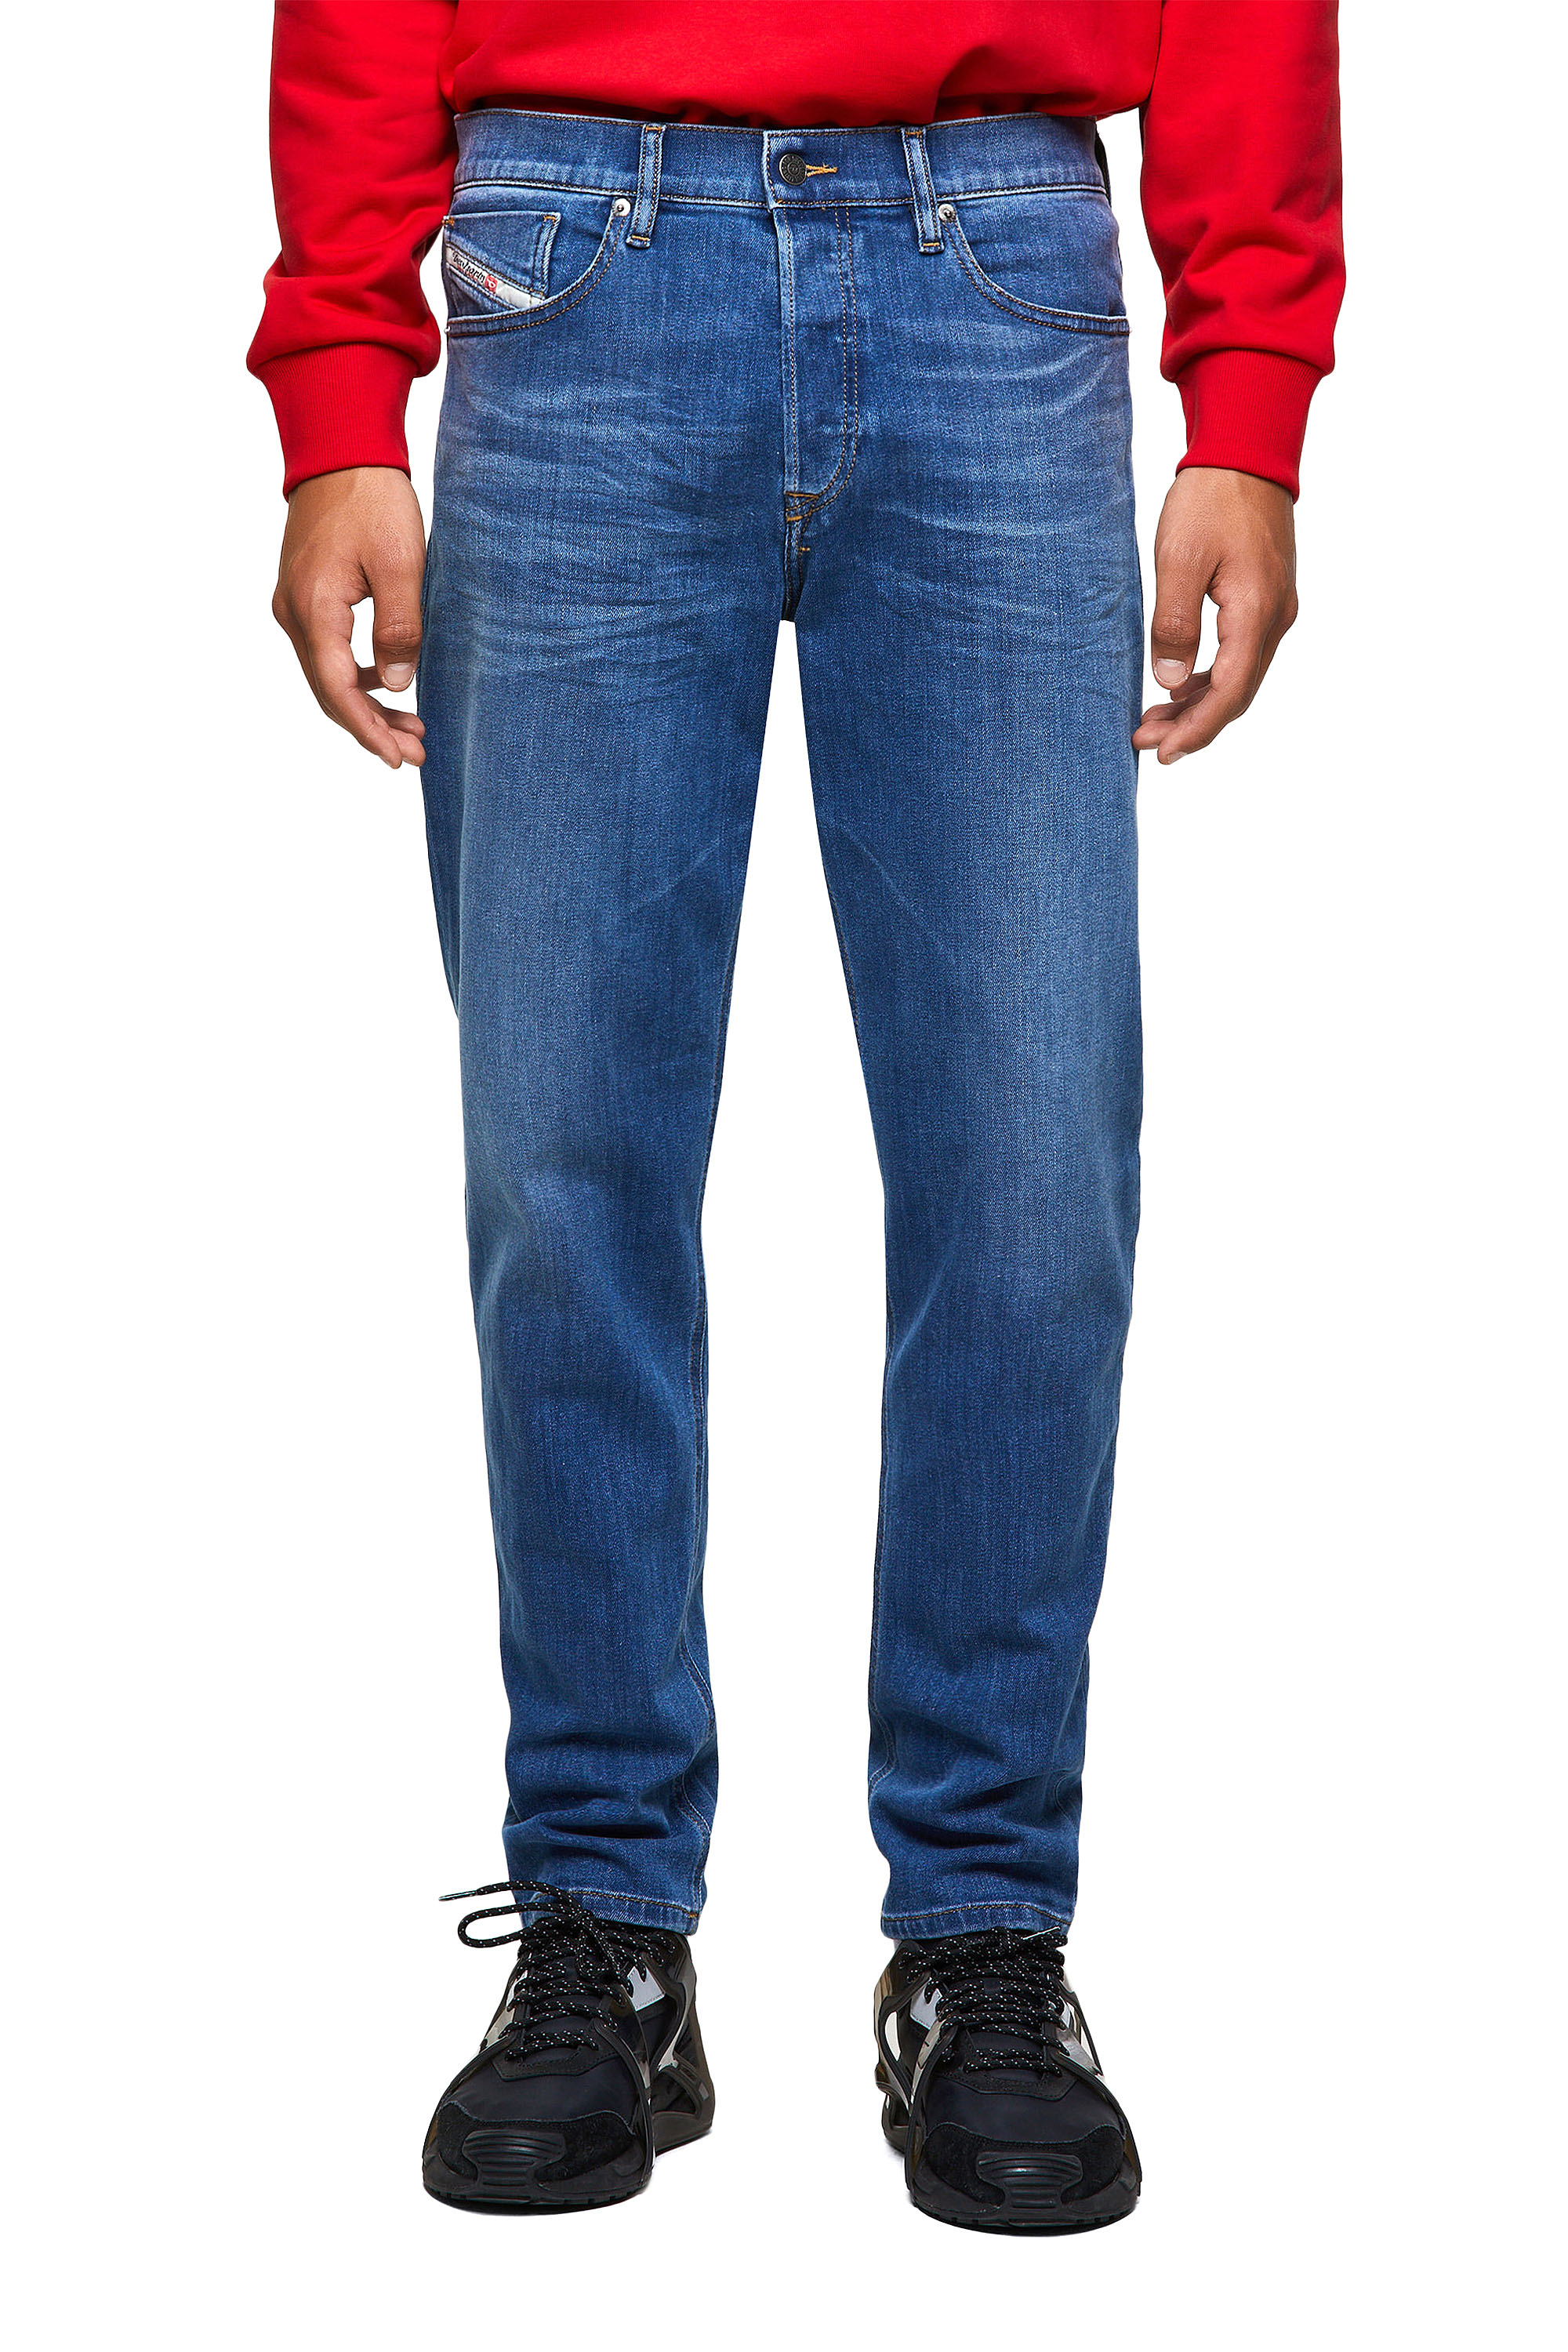 2005 D-FINING 09A80 Tapered Jeans, Medium blue - Jeans